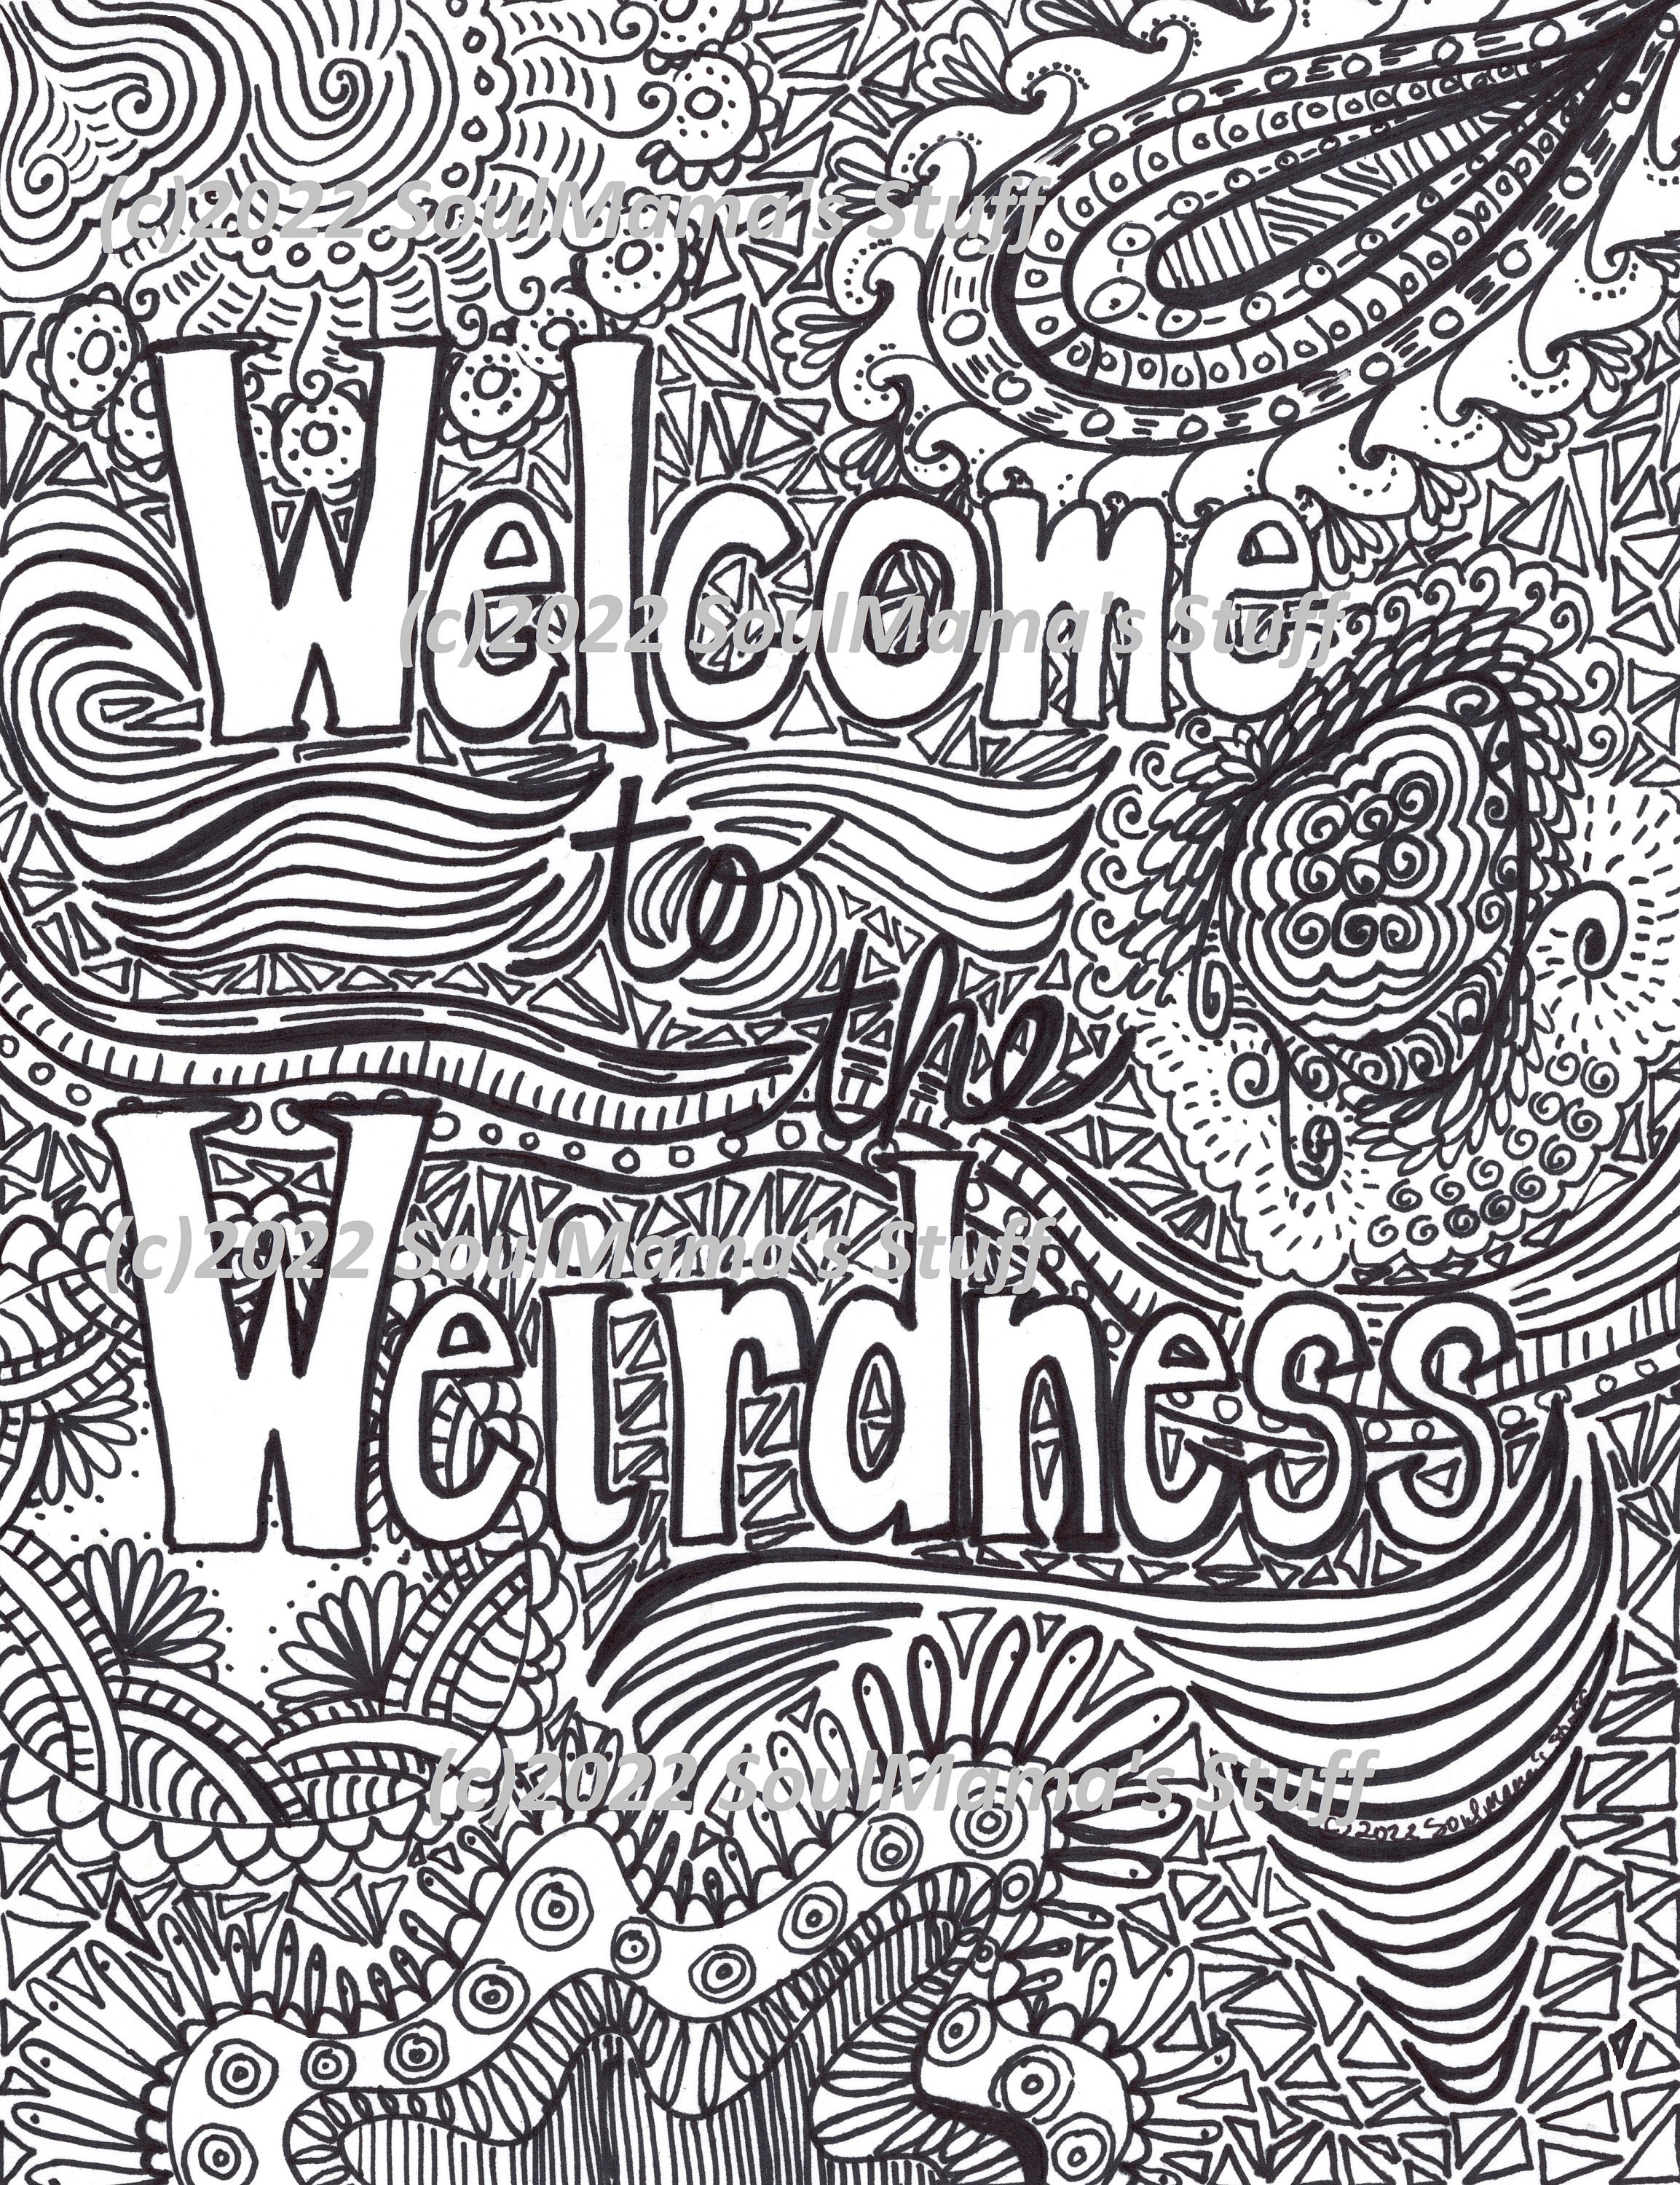 Wele to the weirdness coloring page digital download pdf adult coloring anti